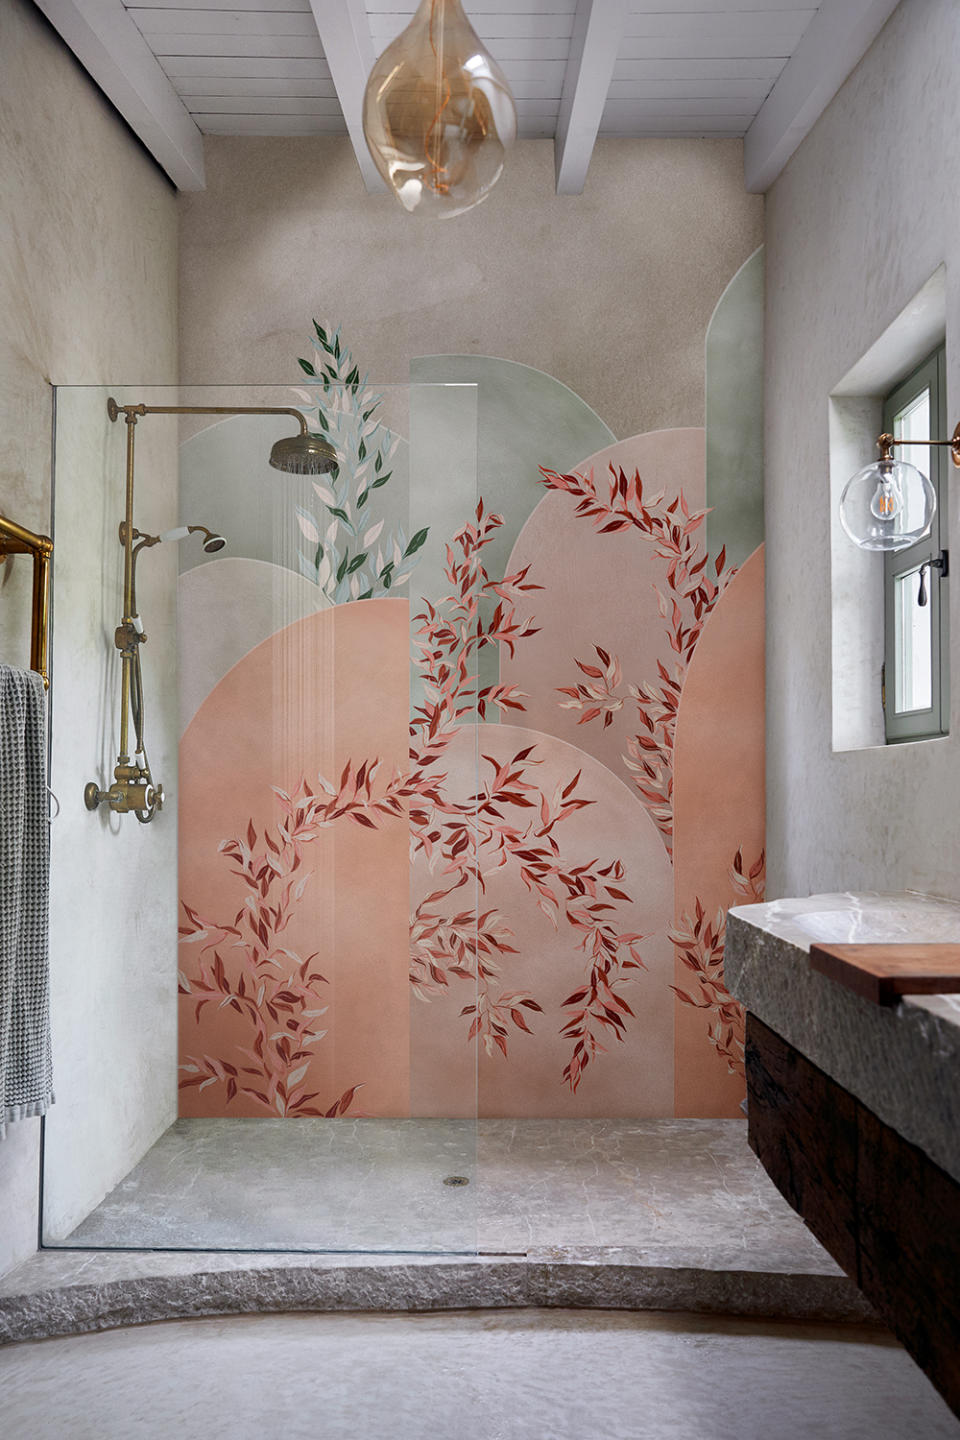 <p> In an otherwise plain space, wallpaper ideas such as the mural shown above are one of the most dramatic bathroom color ideas you can go for. </p> <p> Wall&amp;dec&#xF2;&apos;s wet system wallpapers are extraordinary: impactful and beautiful, they can even be installed over old &#x2013; even &#x2013; tiles to create a space with true wow factor. </p>